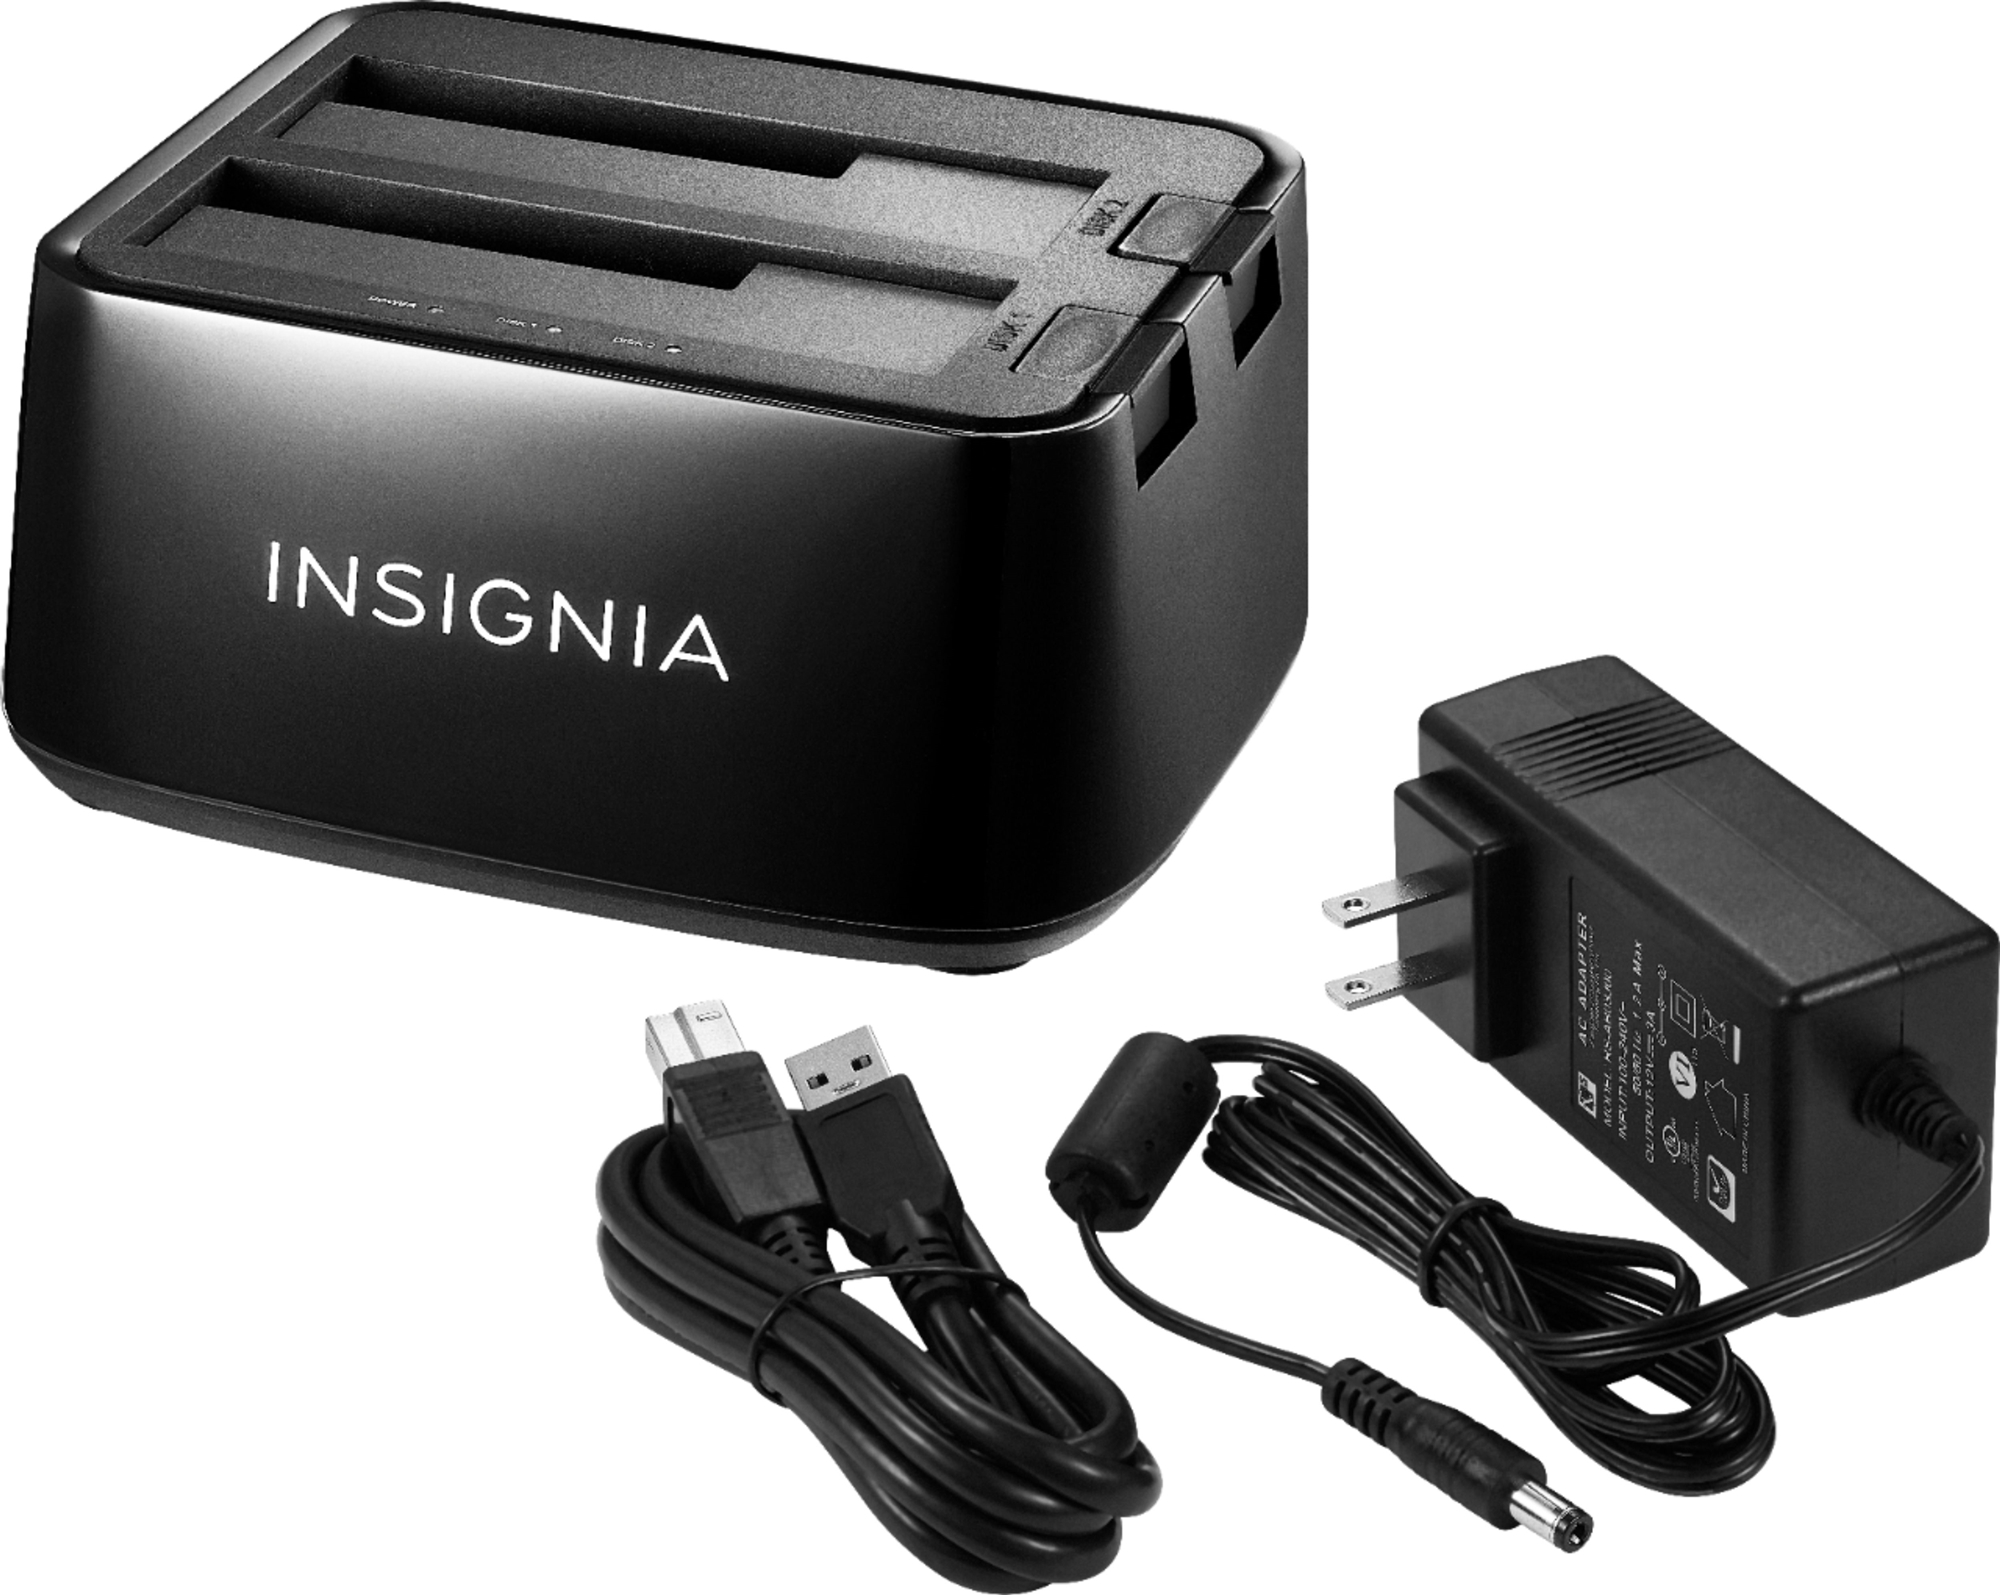 how-can-i-get-the-output-from-insignia-dual-hard-drive-docking-station-to-my-computer